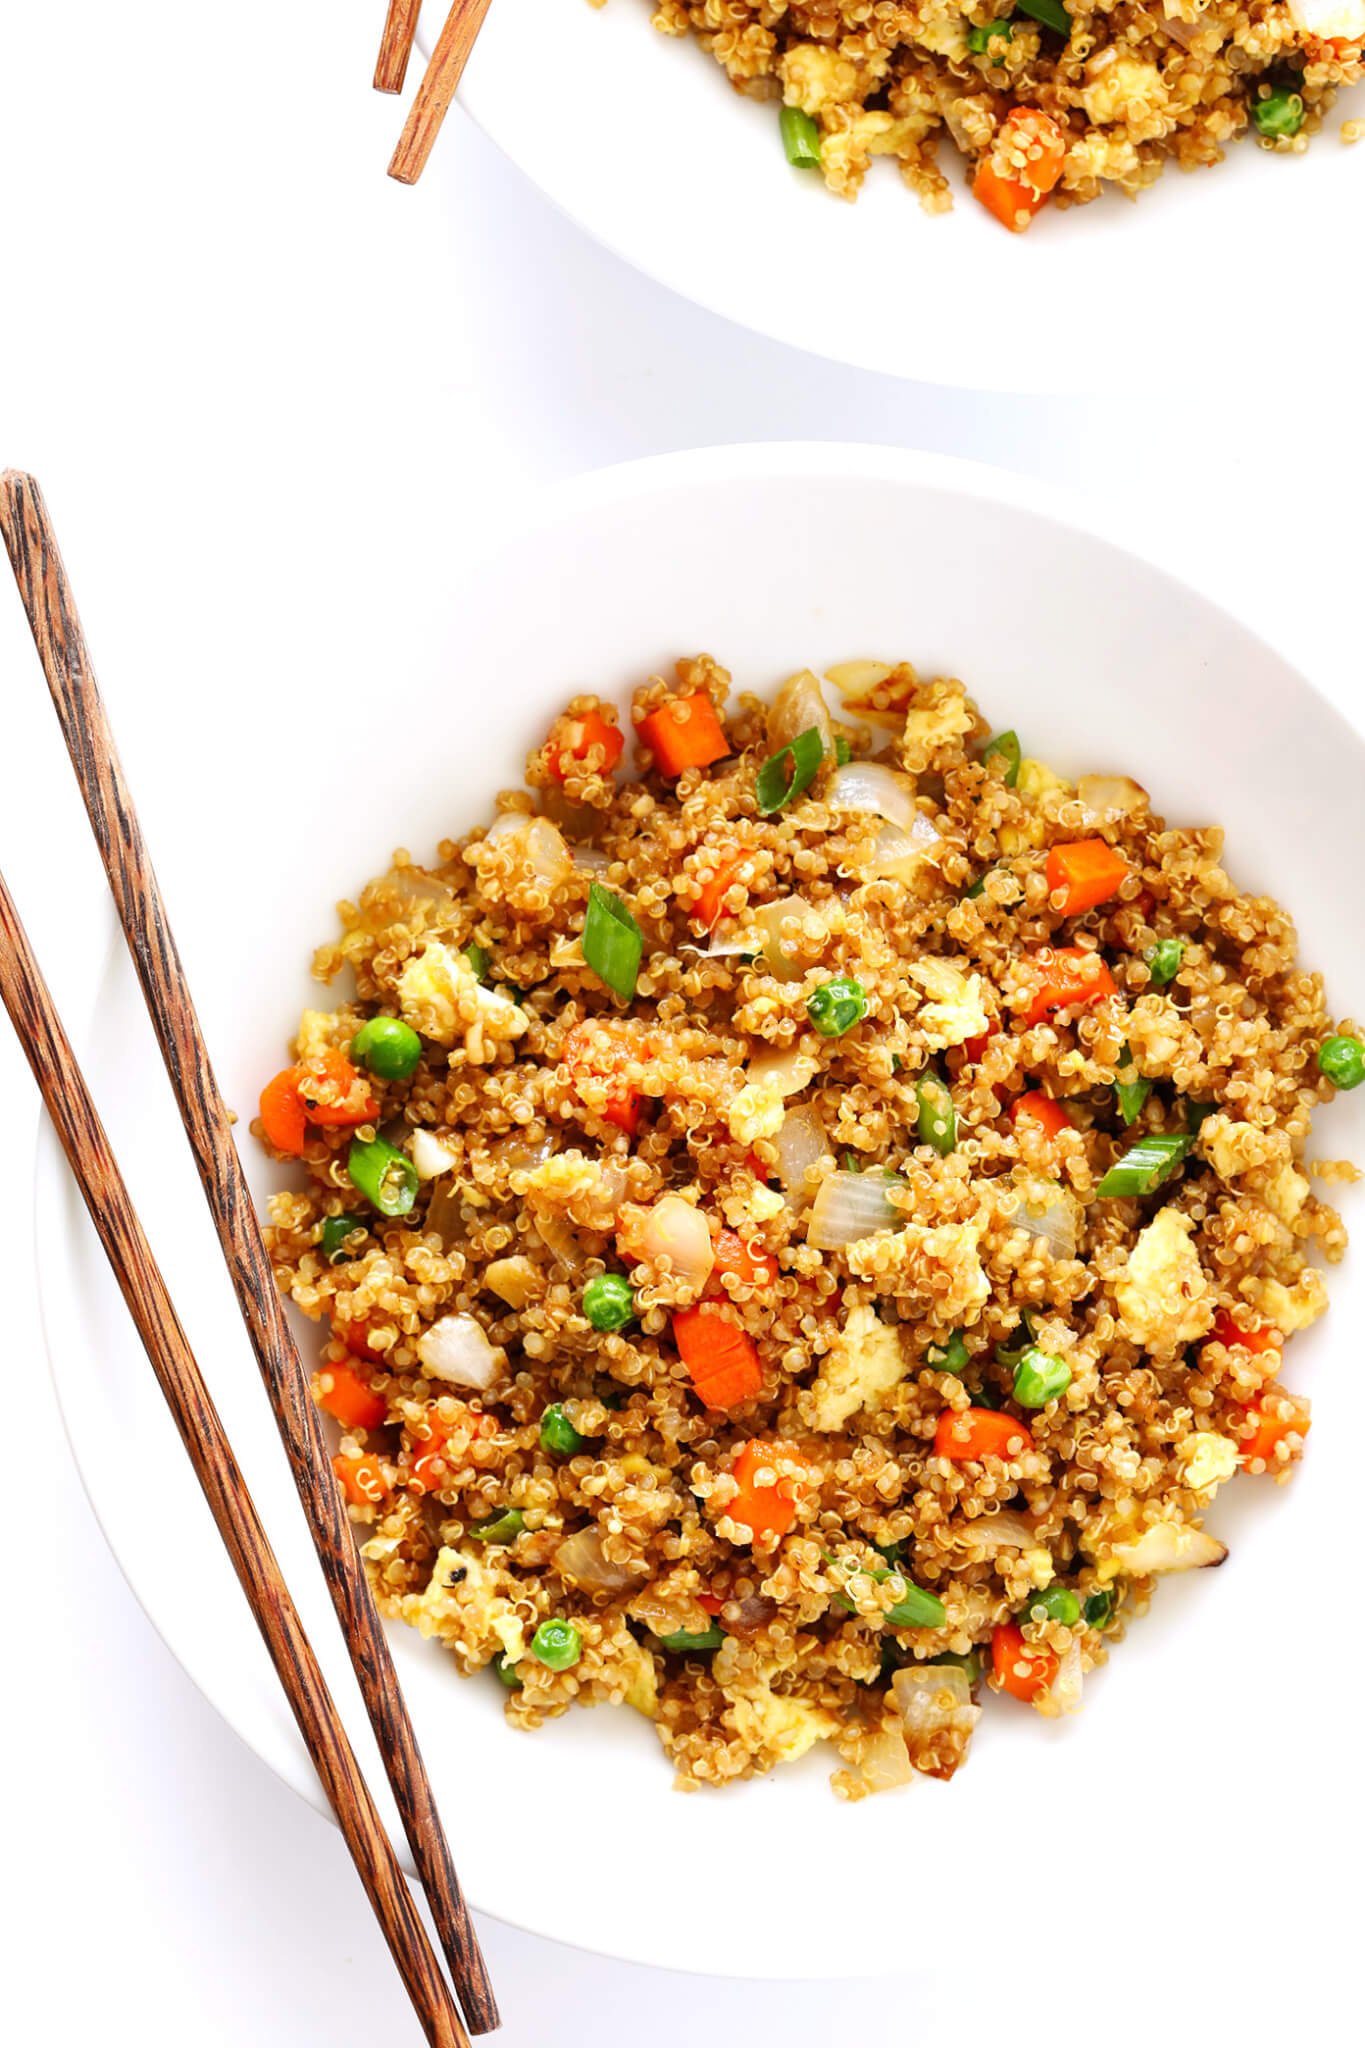 This 15-Minute Quinoa Fried "Rice" recipe is the best!! It's super easy to make, full of big flavors, and it's the perfect side or main dish. Feel free to add chicken, pork, tofu, shrimp, beef, or veggies if you'd like! | gimmesomeoven.com (Vegetarian)